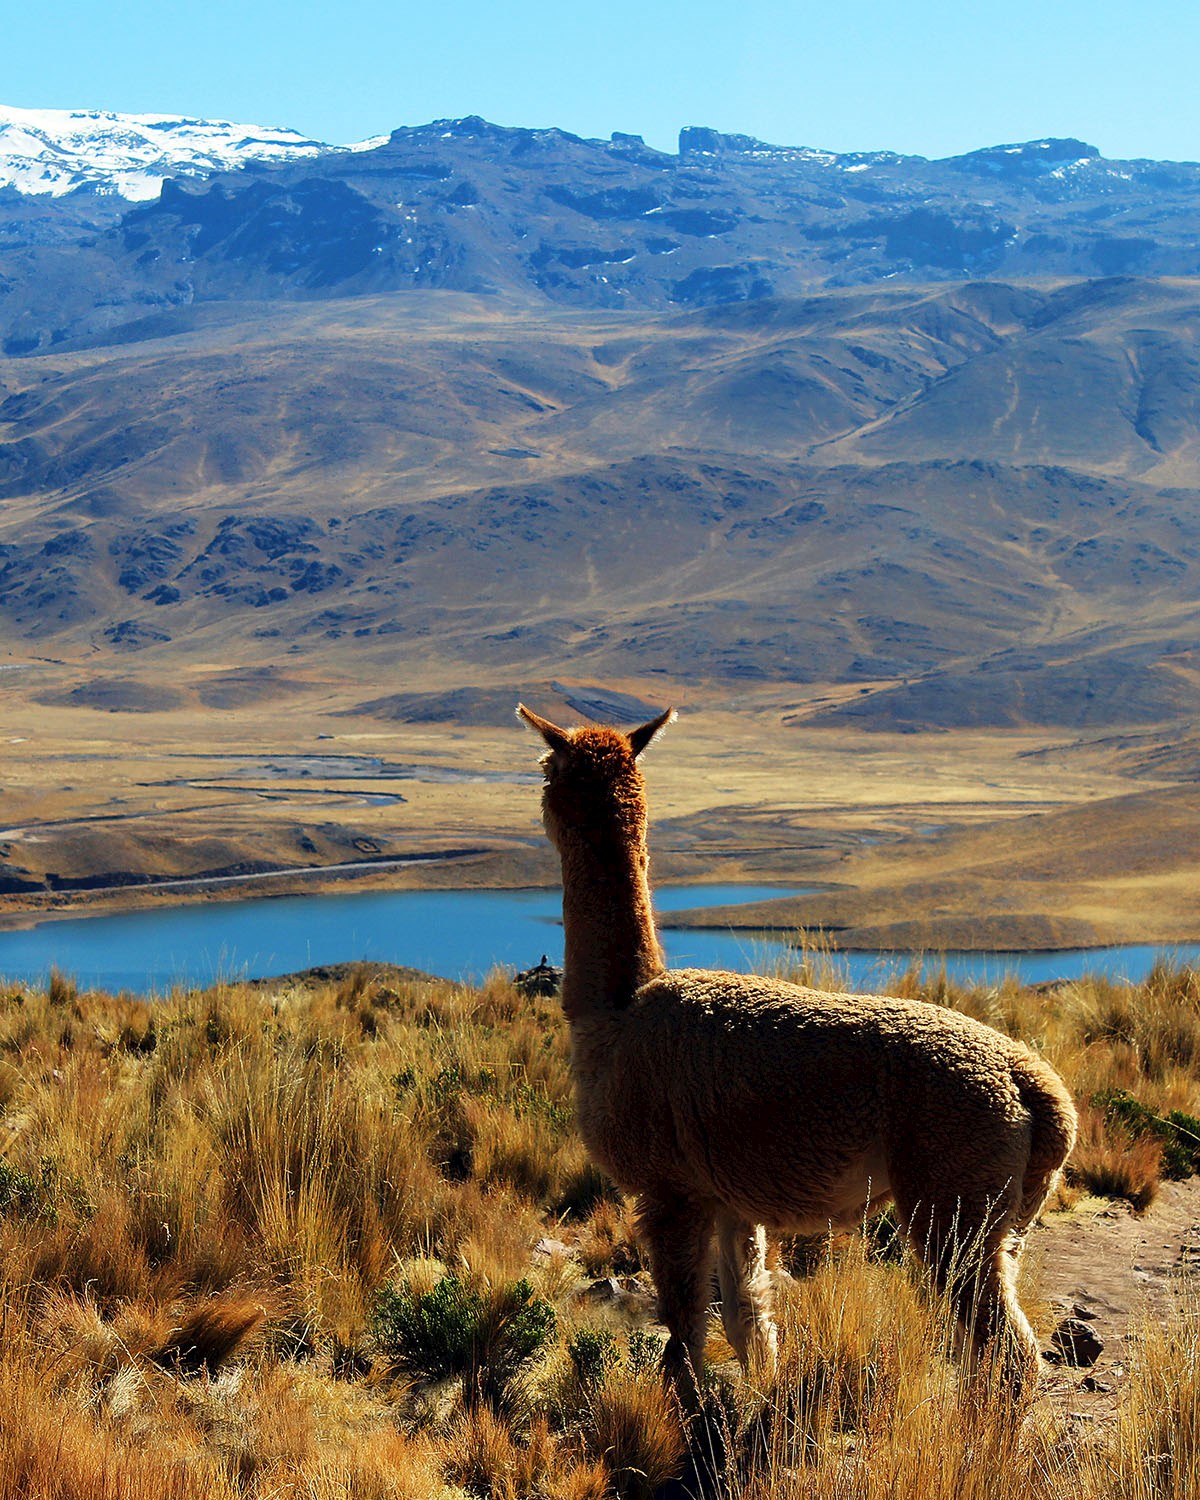 Alpacas, one of the most iconic animals of the region - 